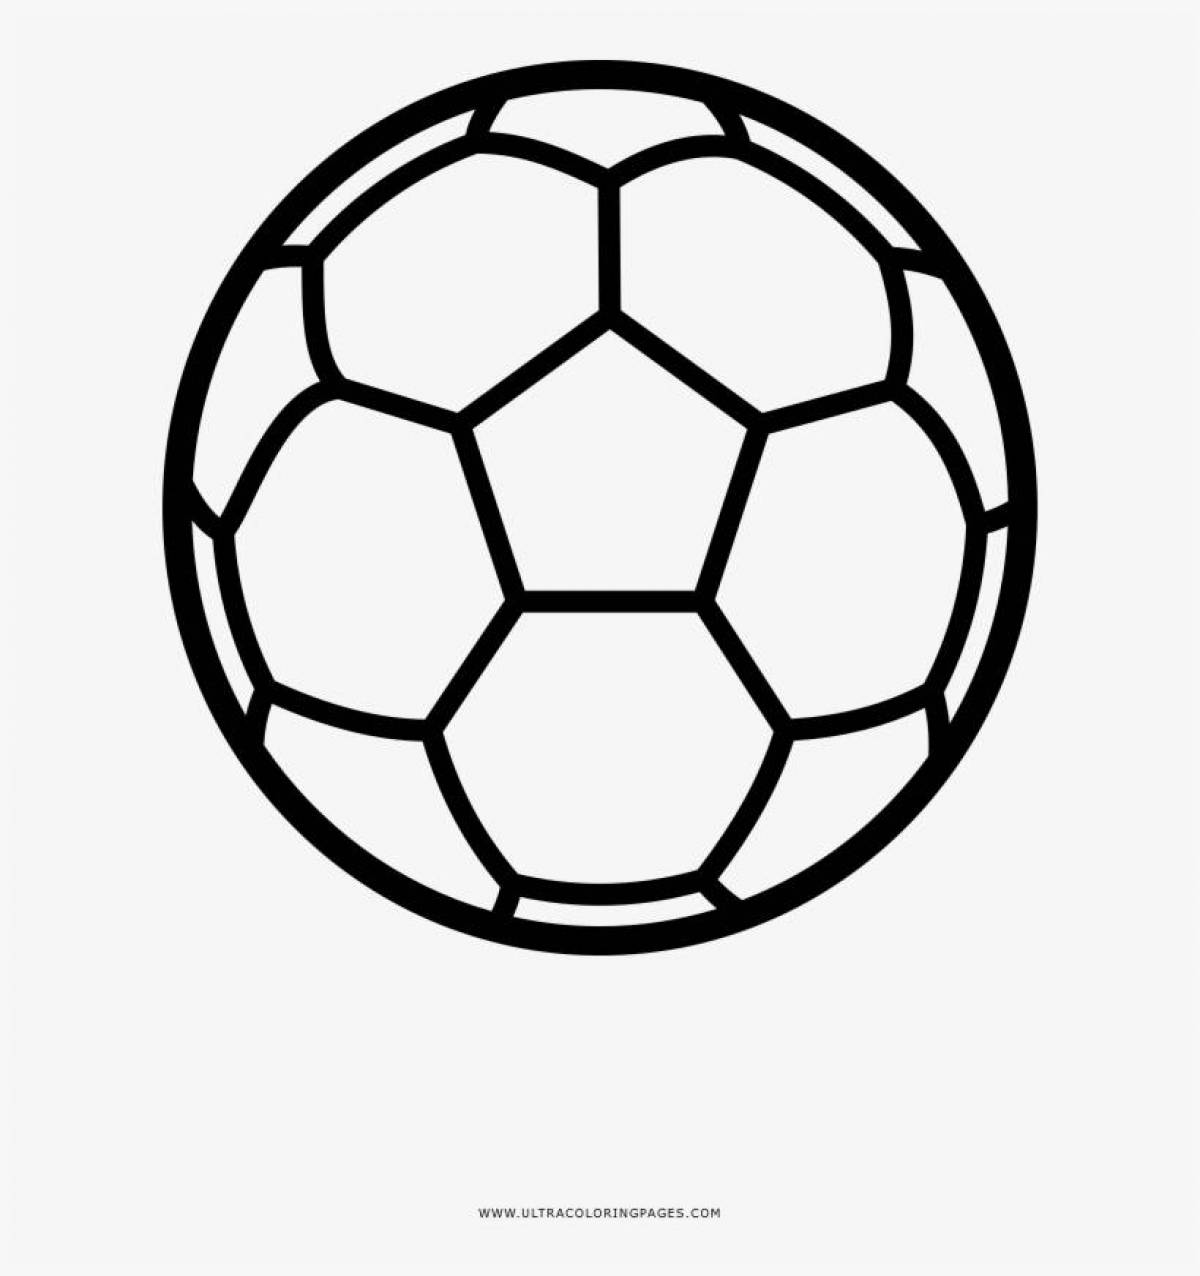 Coloring page of spectacular soccer ball